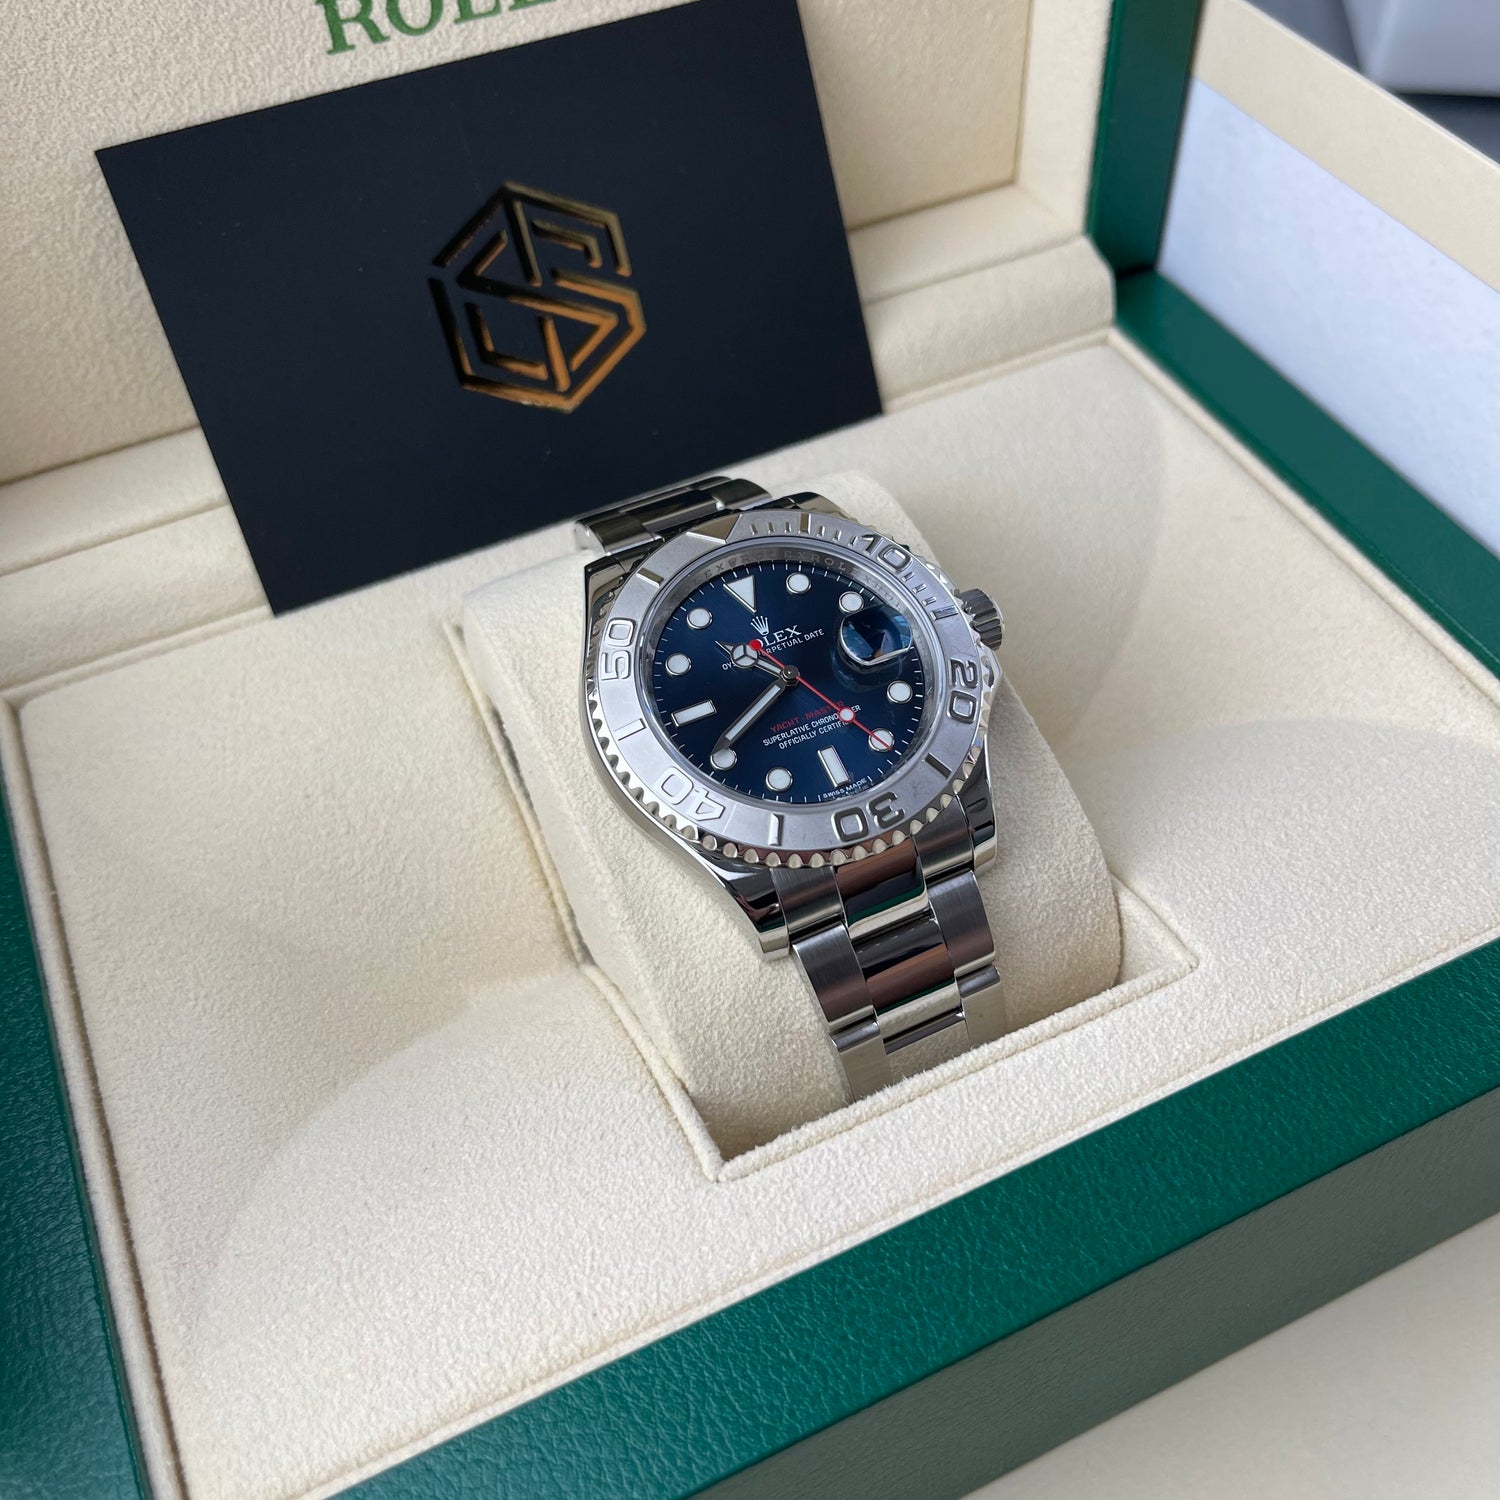 Rolex Yacht-Master 40 116622 Blue Dial 2015 Discontinued Full Set Watch